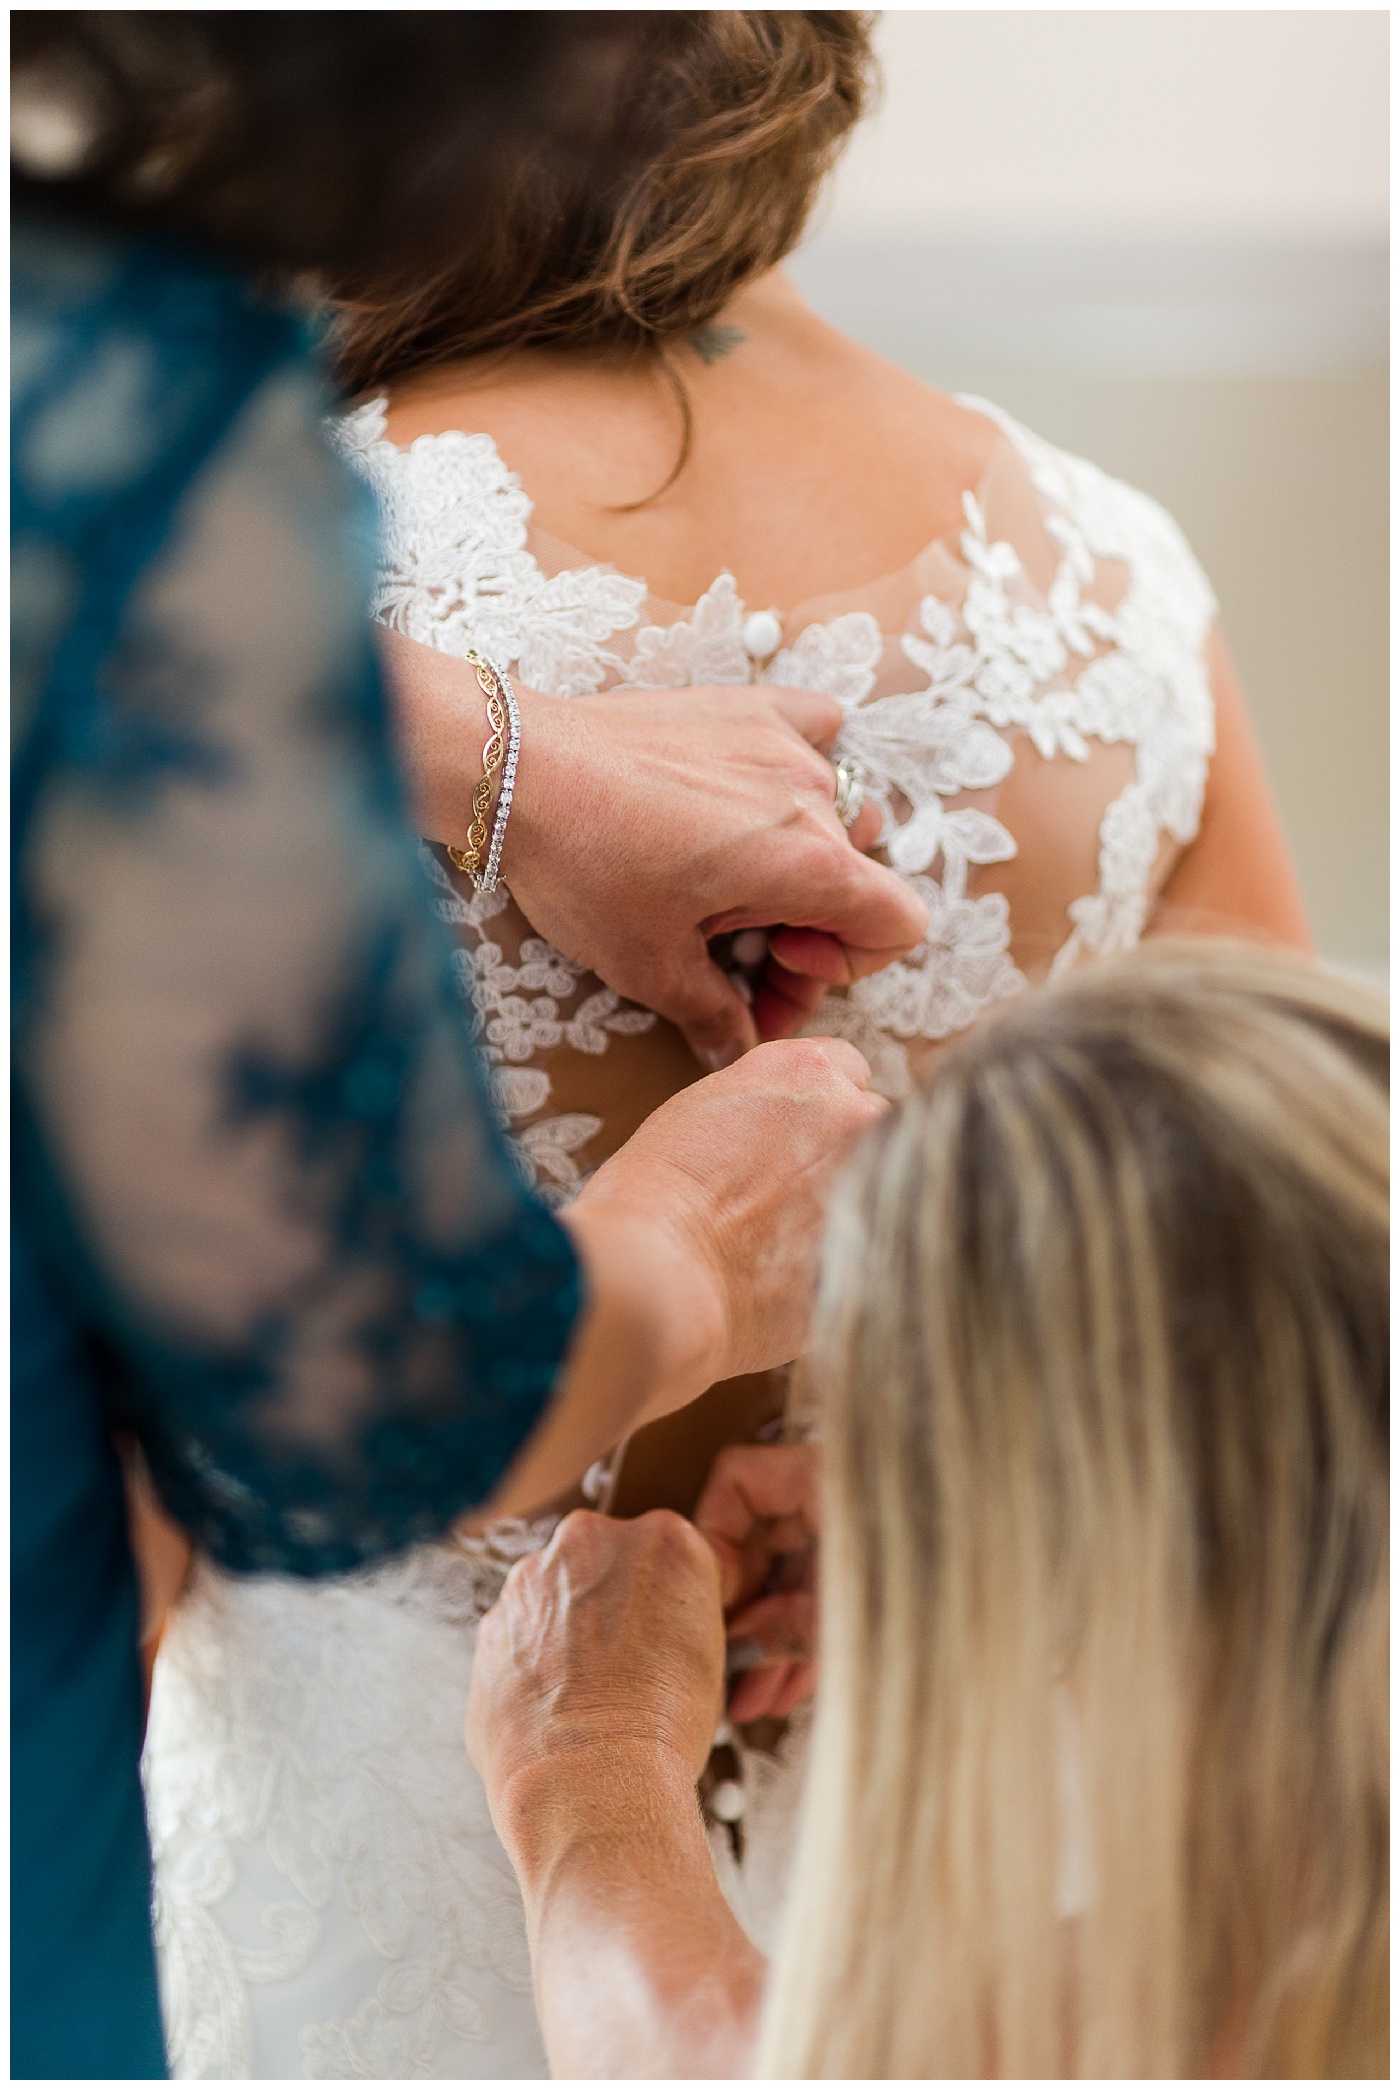 Leigh Skaggs Photography | Behind the Scenes